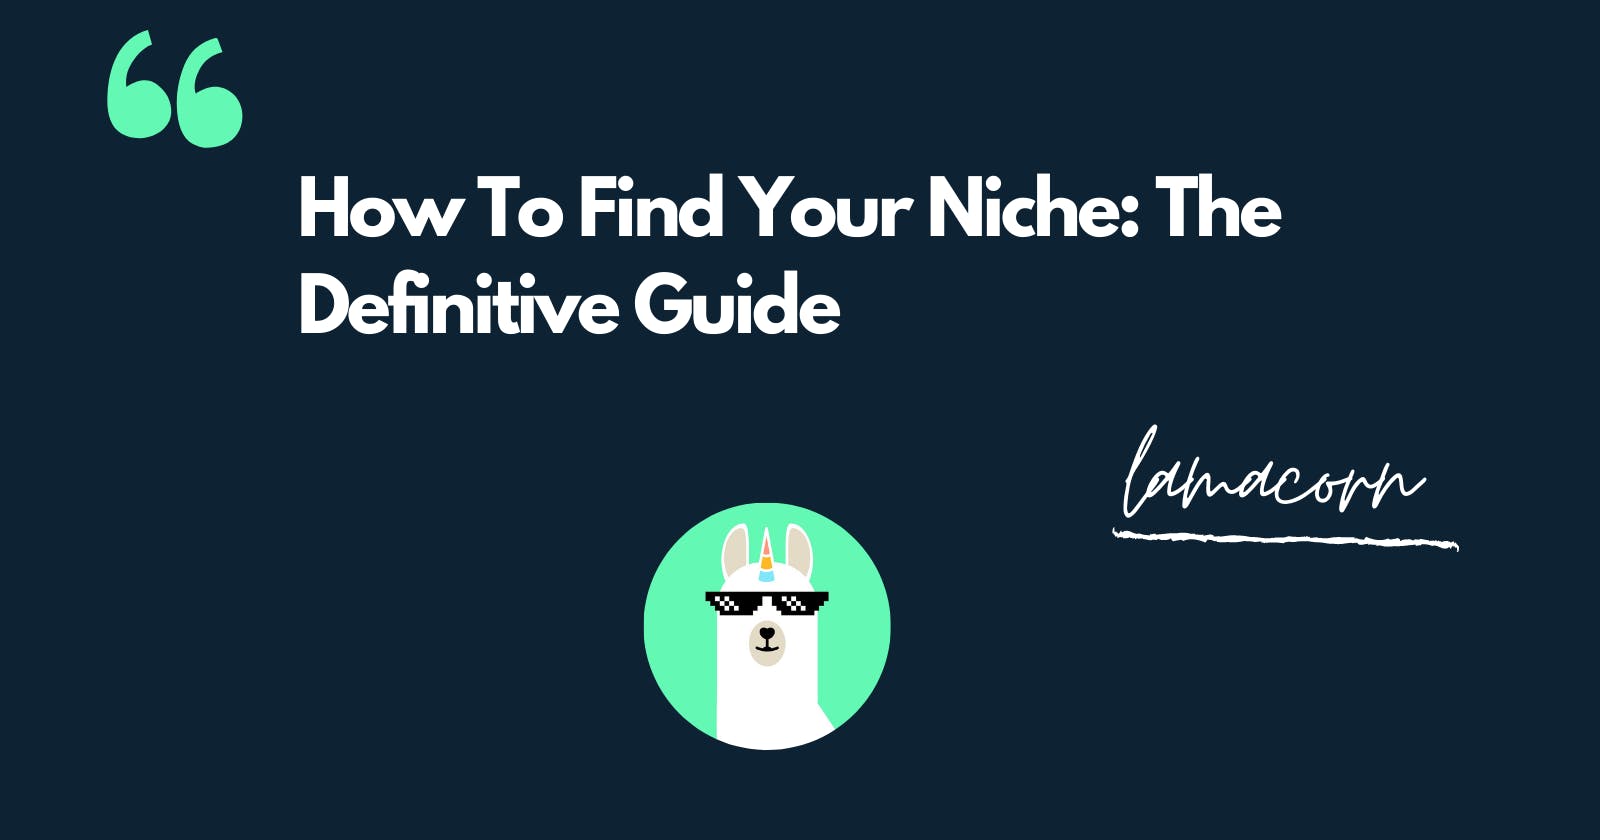 How To Find Your Niche: The Definitive Guide